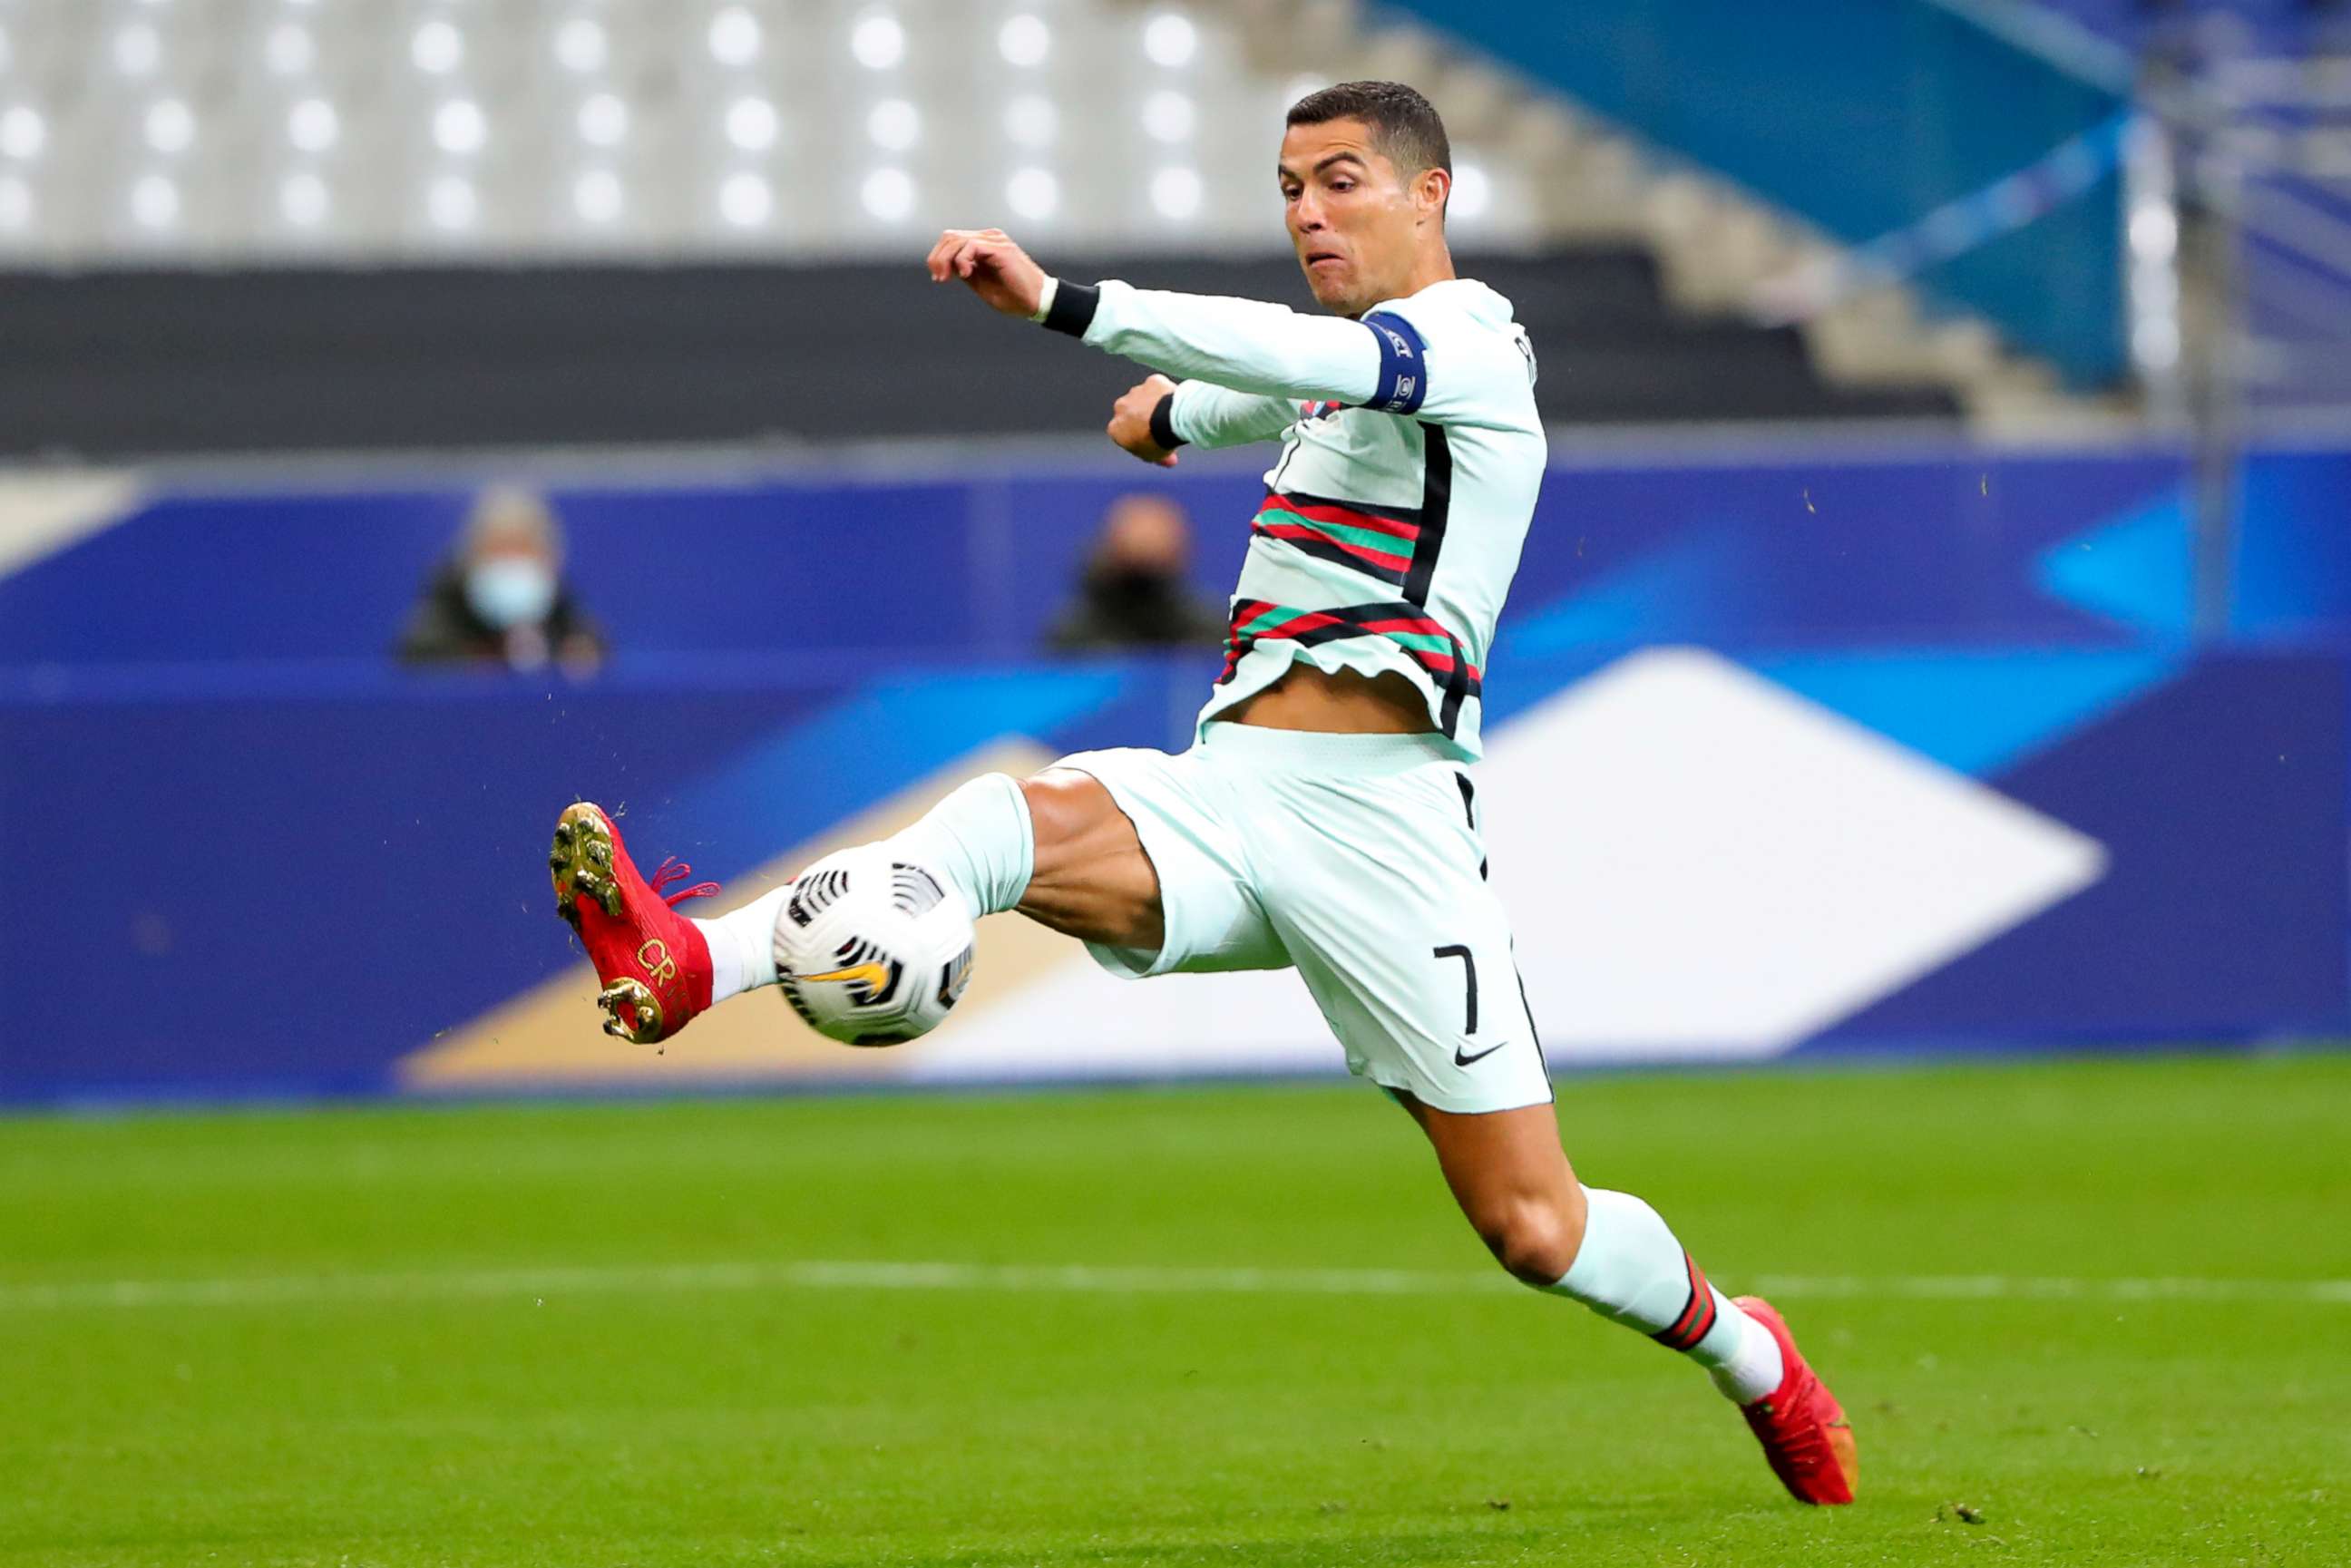 PHOTO: Portugal's Cristiano Ronaldo stretches for the ball during the UEFA Nations League soccer match between France and Portugal at the Stade de France in Saint-Denis, north of Paris, France, on Oct. 11, 2020.